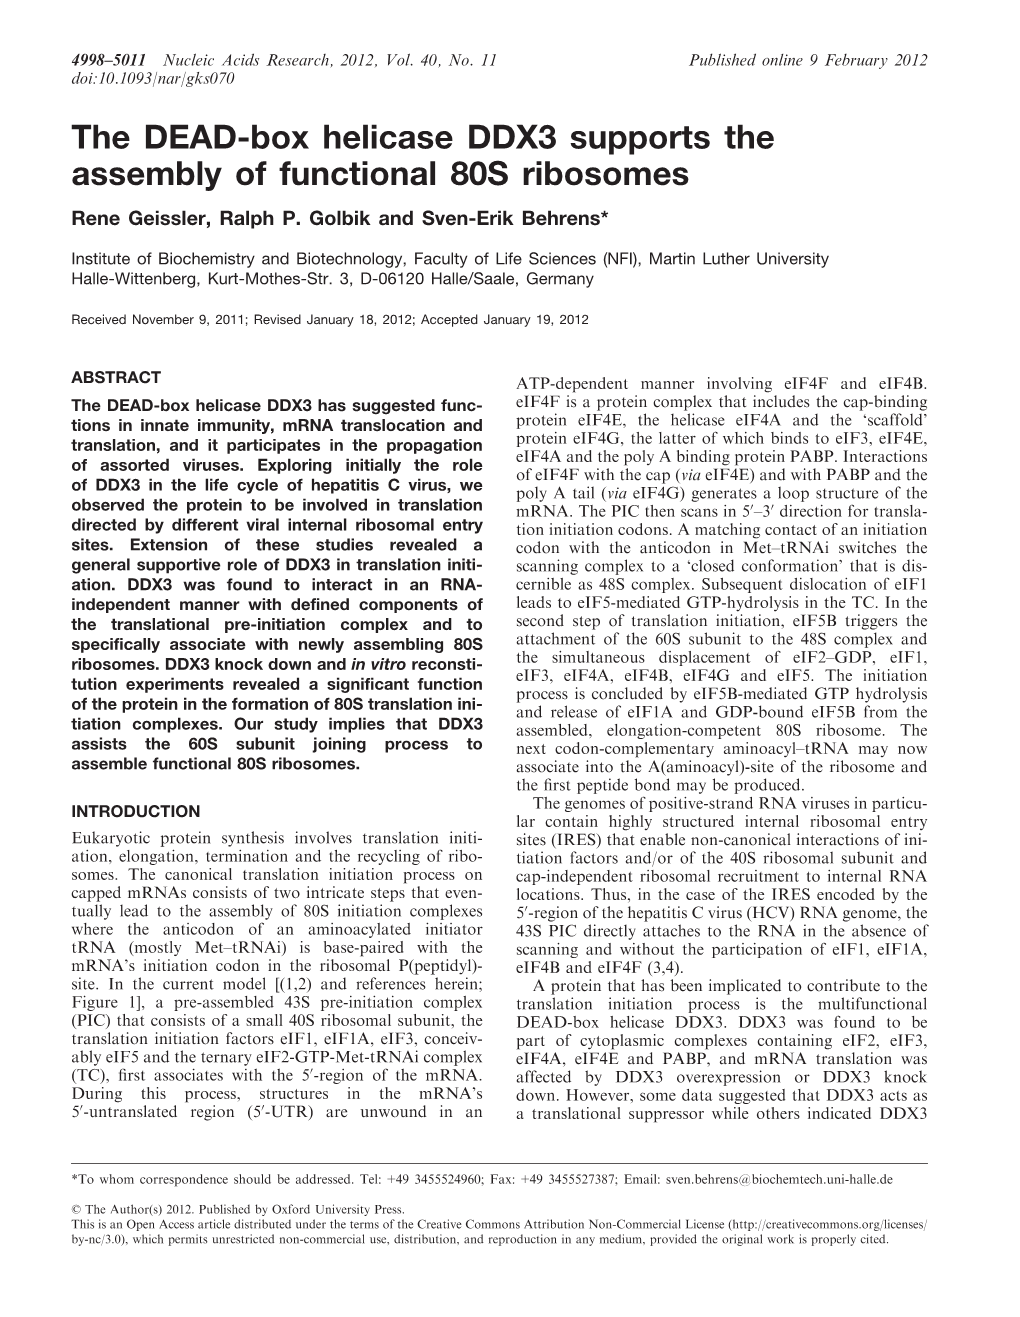 The DEAD-Box Helicase DDX3 Supports the Assembly of Functional 80S Ribosomes Rene Geissler, Ralph P